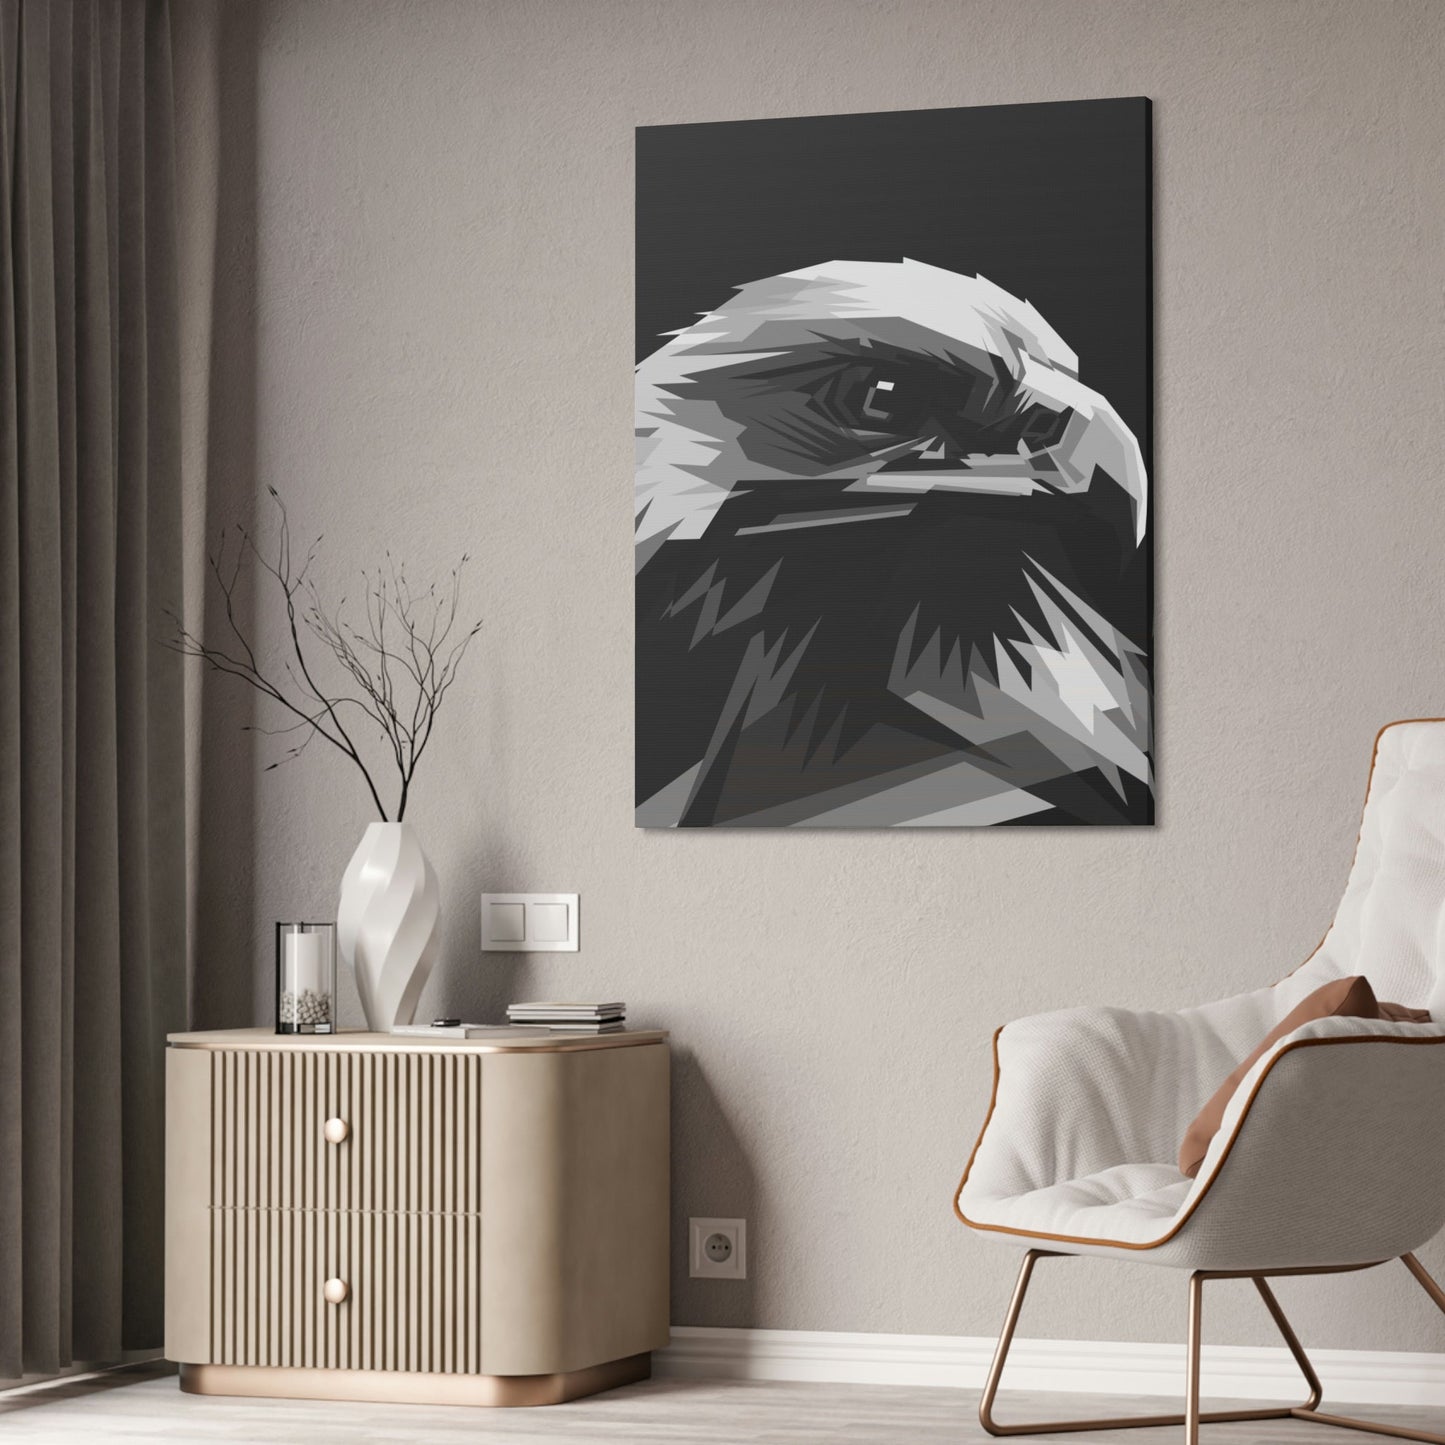 Mystical Guardians: Framed Poster Embodied with the Essence of Eagles